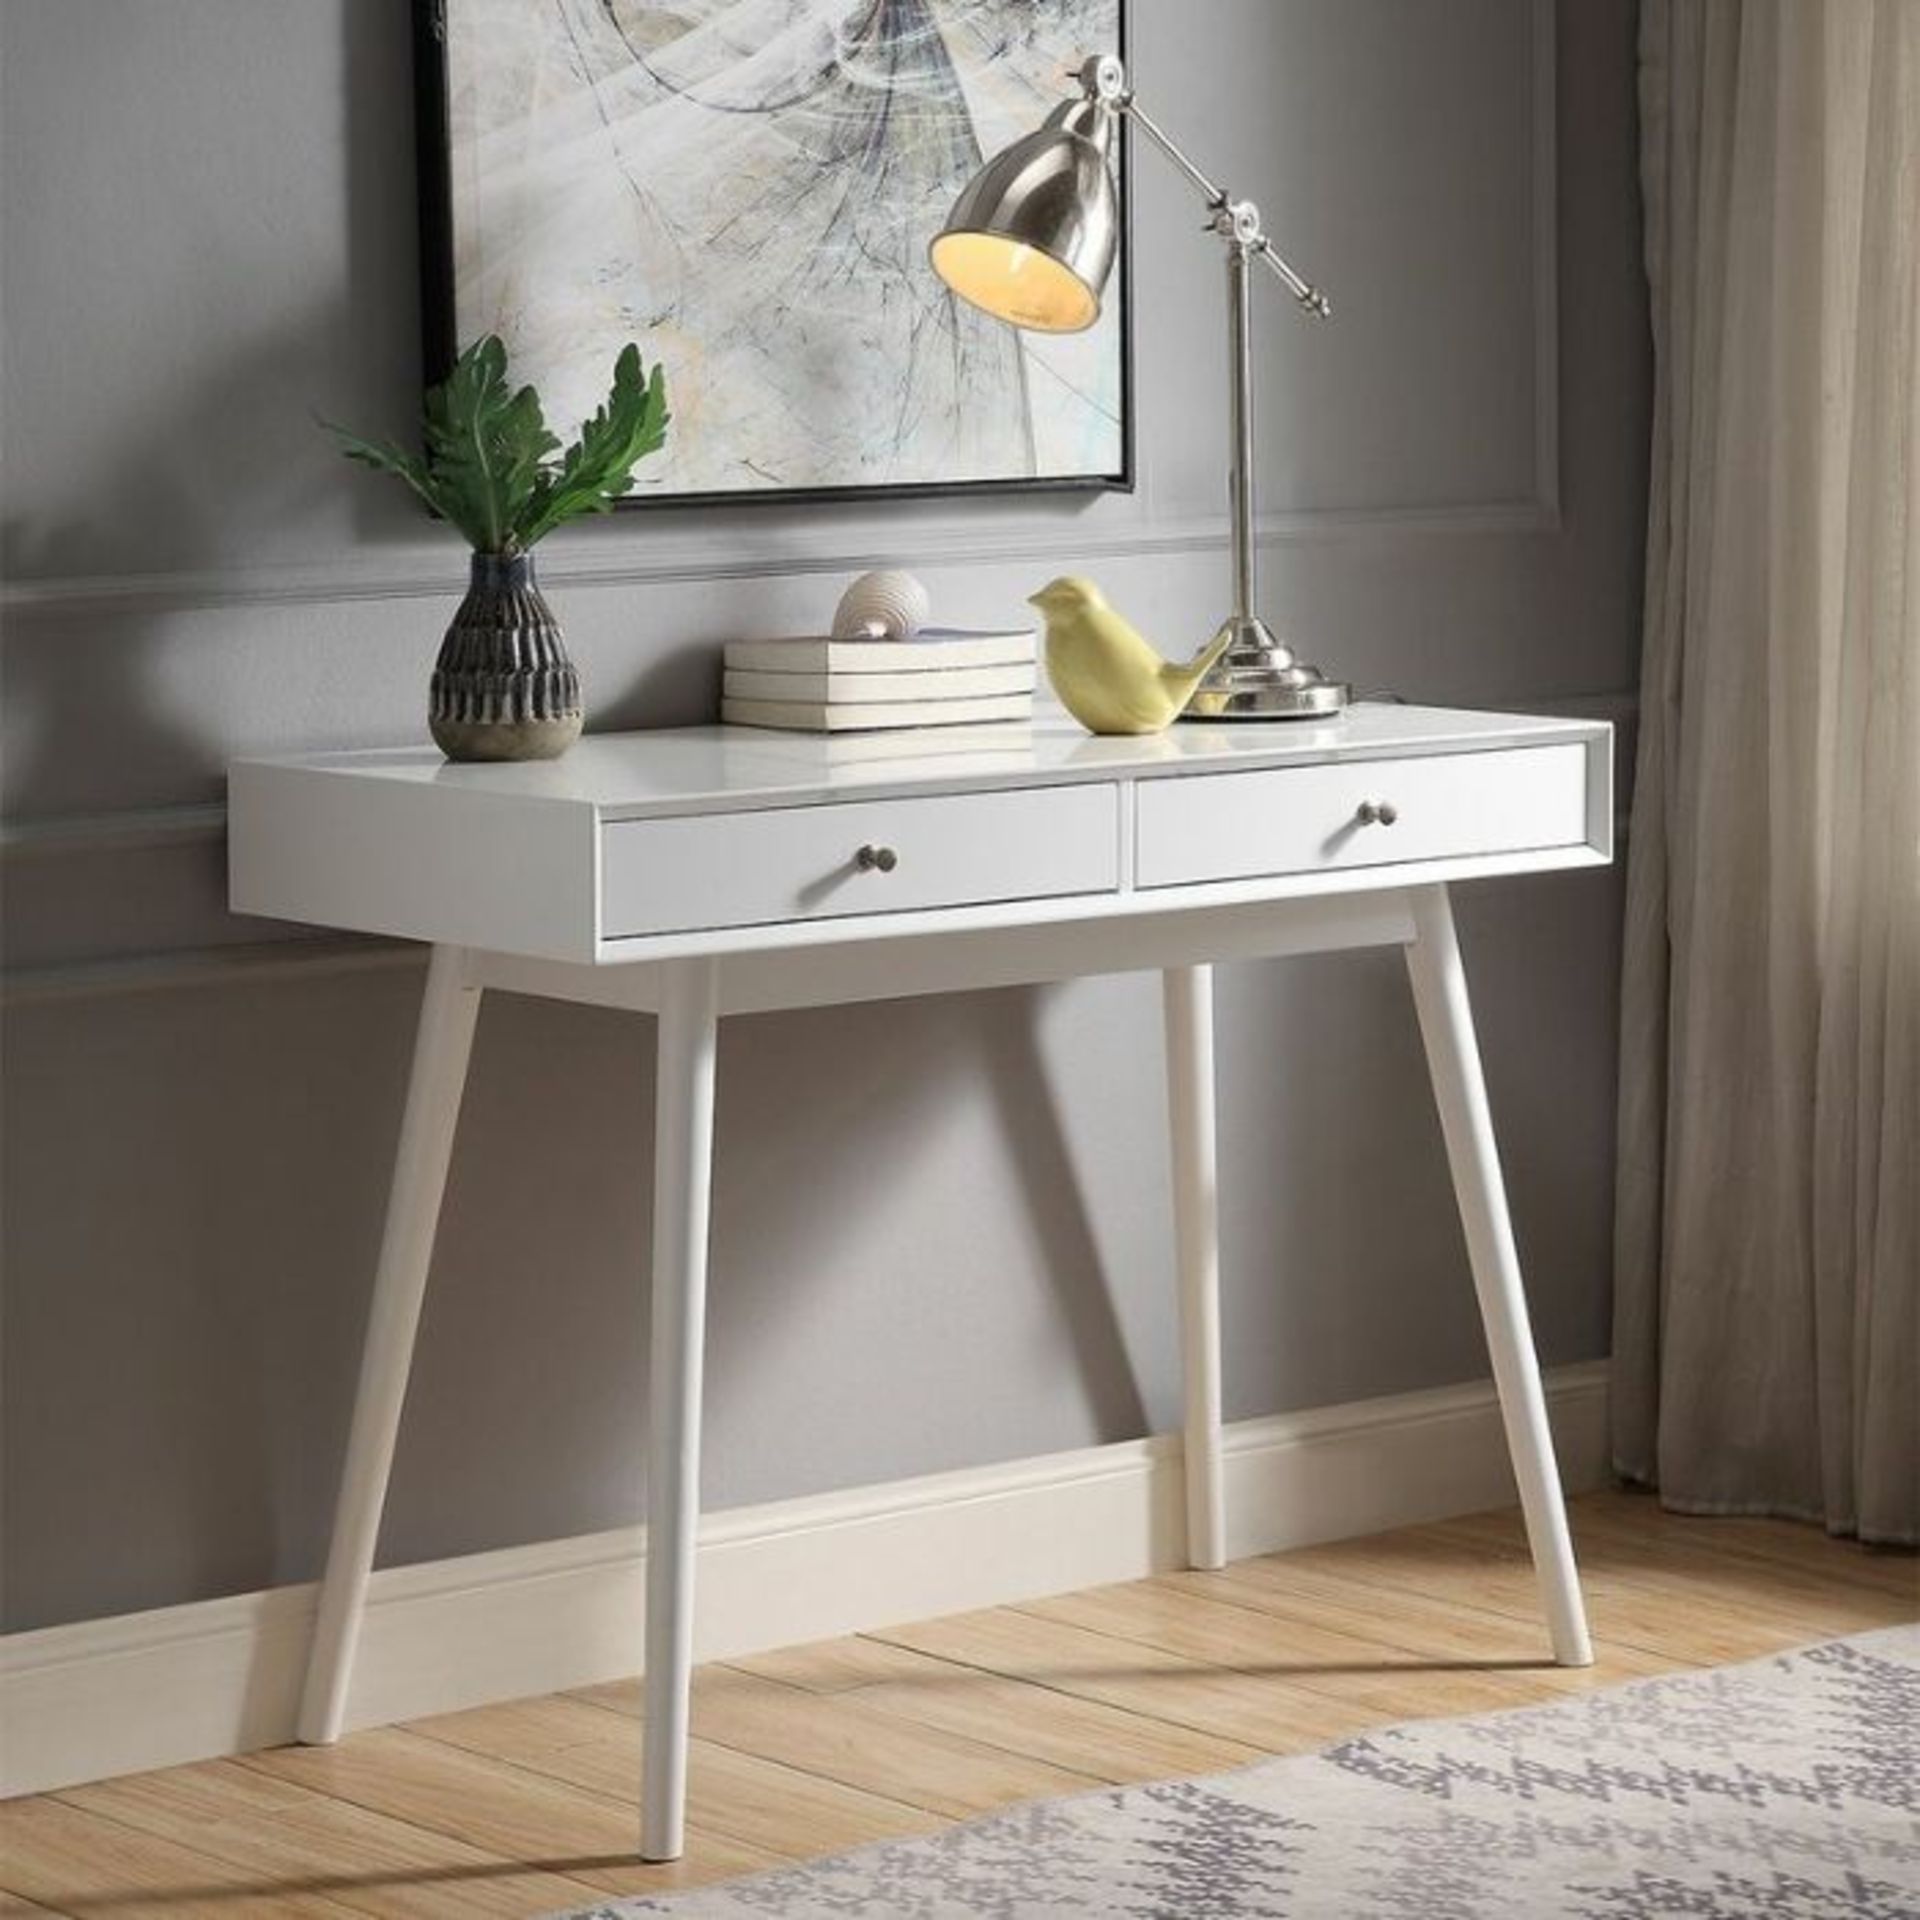 HEDMARK 2 DRAWER CONSOLE TABLE WHITE